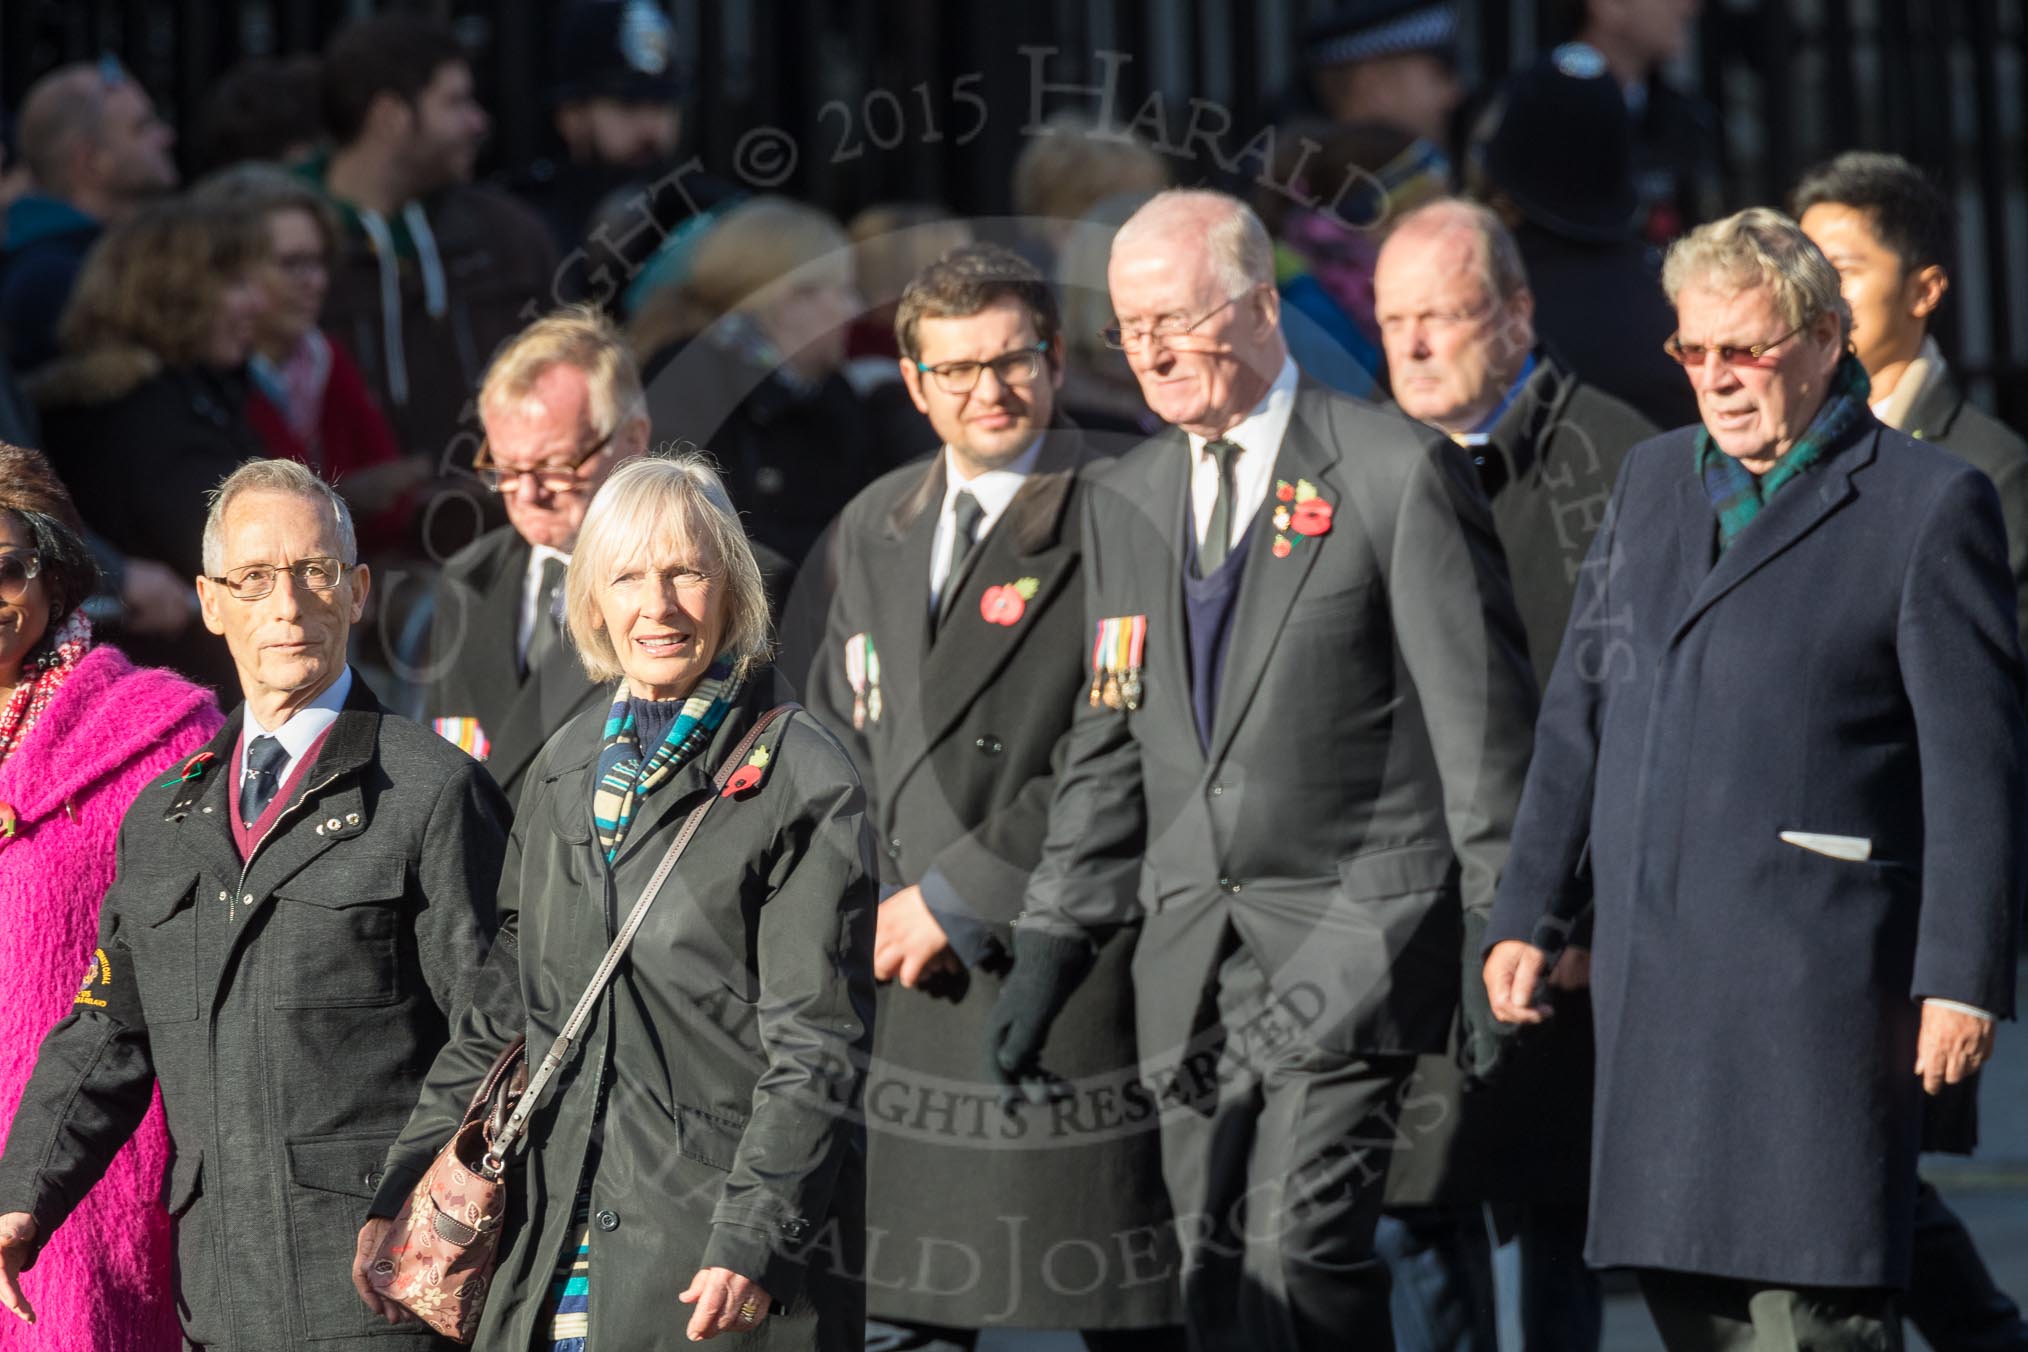 March Past, Remembrance Sunday at the Cenotaph 2016: M29 Rotary International.
Cenotaph, Whitehall, London SW1,
London,
Greater London,
United Kingdom,
on 13 November 2016 at 13:17, image #2748